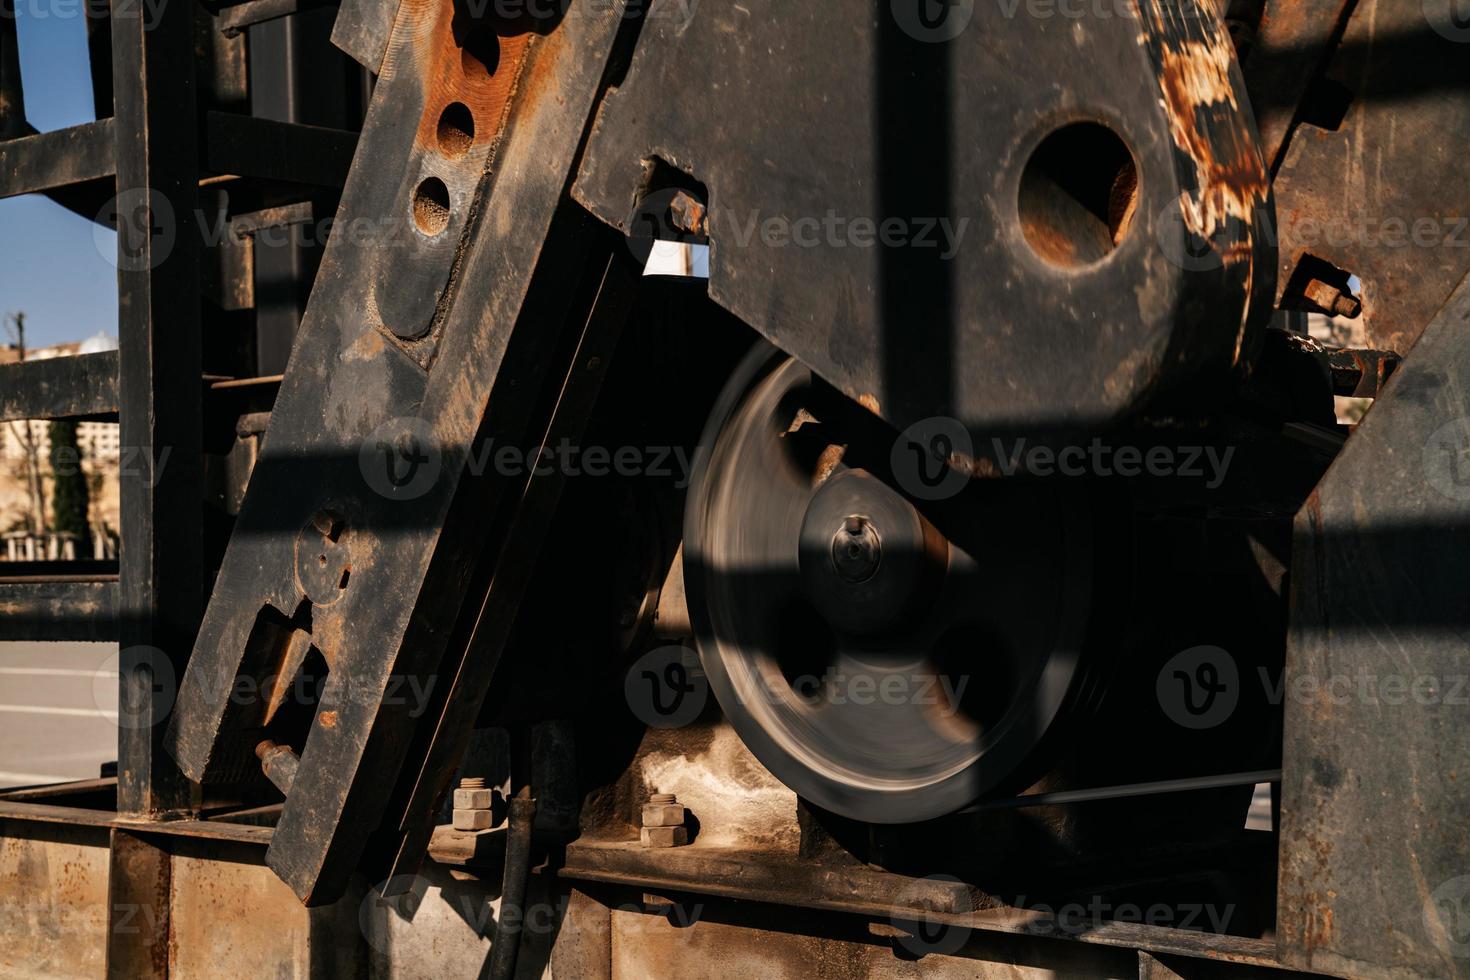 oil pump close-up details. Oil industry equipment. photo